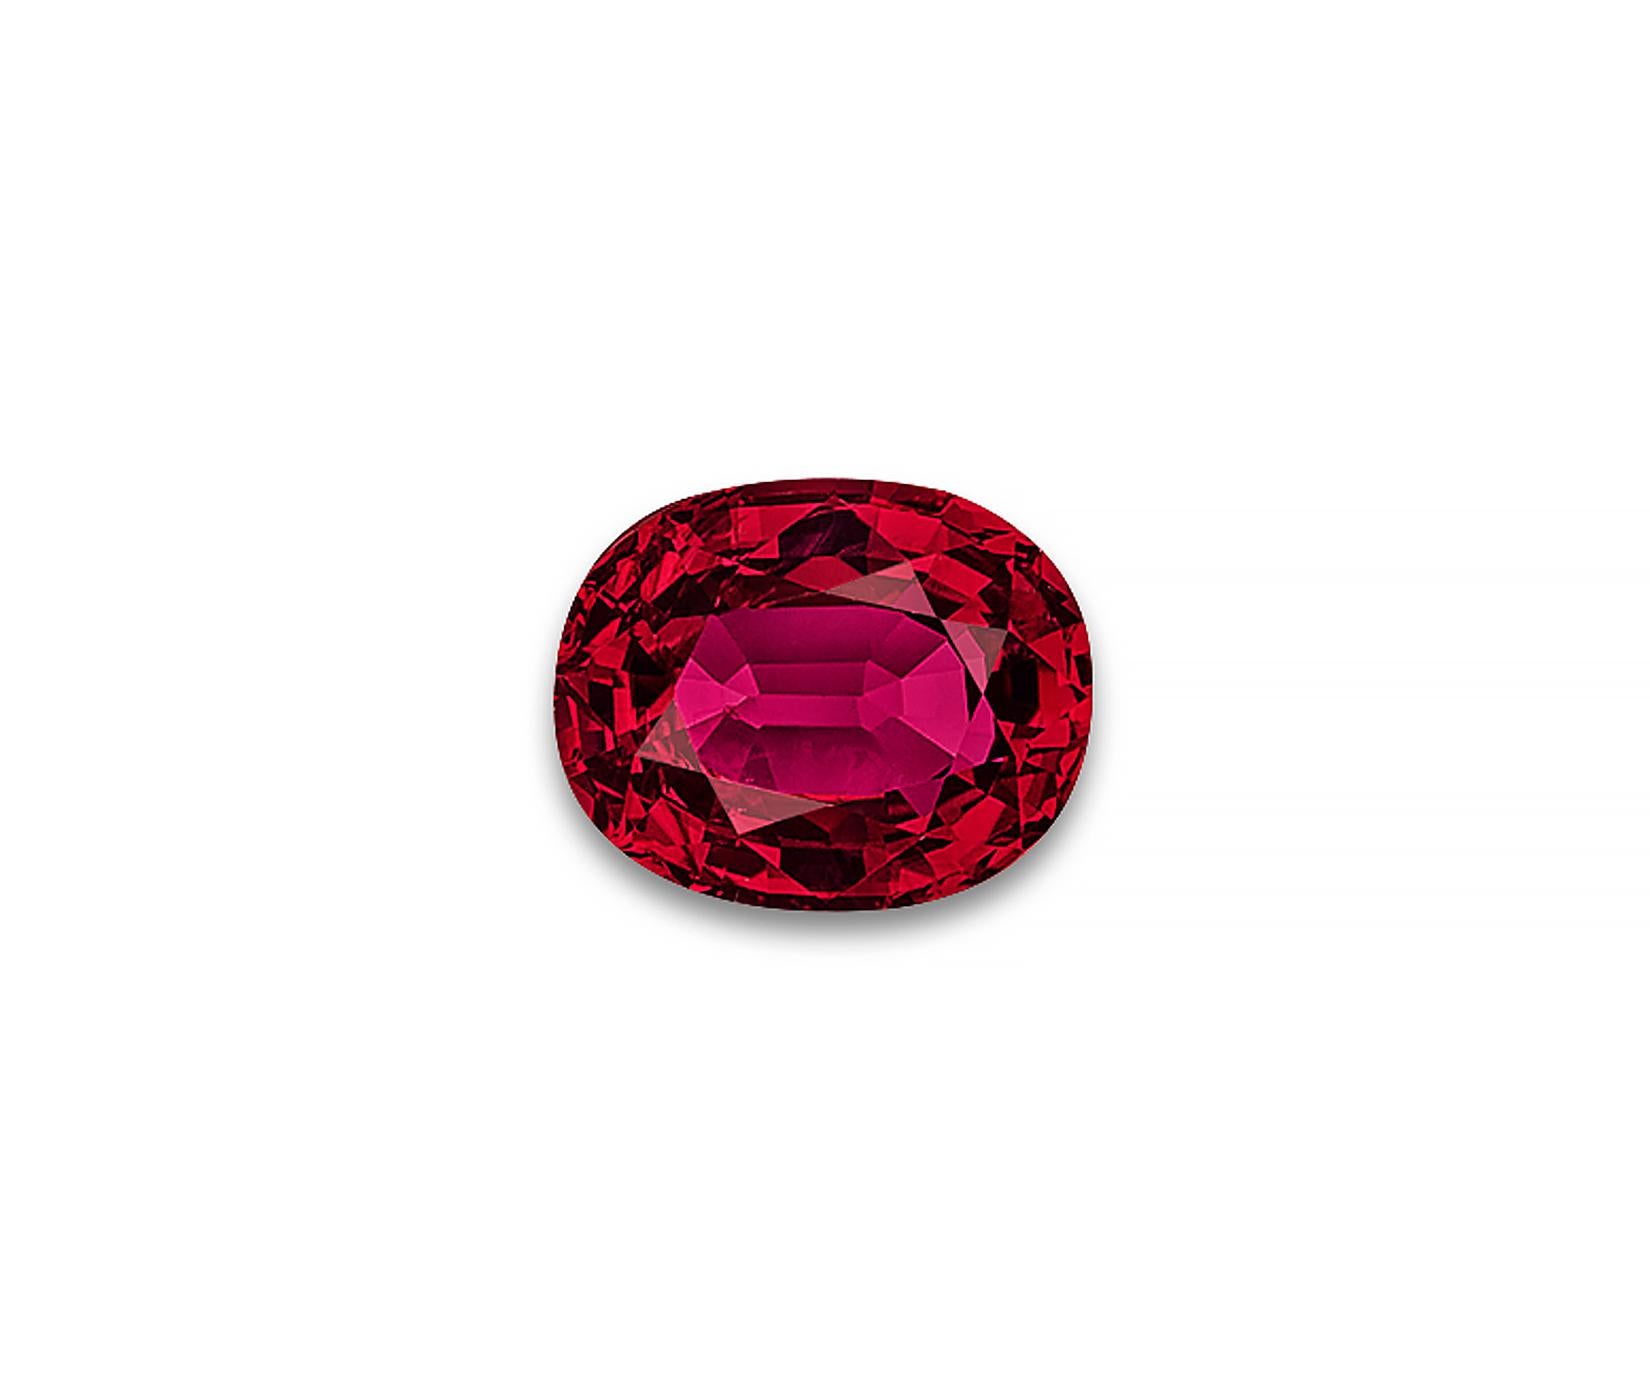 This striking Reality Stone oval cut ruby has phenomenal clarity and depth of color. It was cut and polished by the finest gem-cutters for Marvel and East Continental Gems. The Reality Stone is part of the Marvel Infinity Gem Collection and this